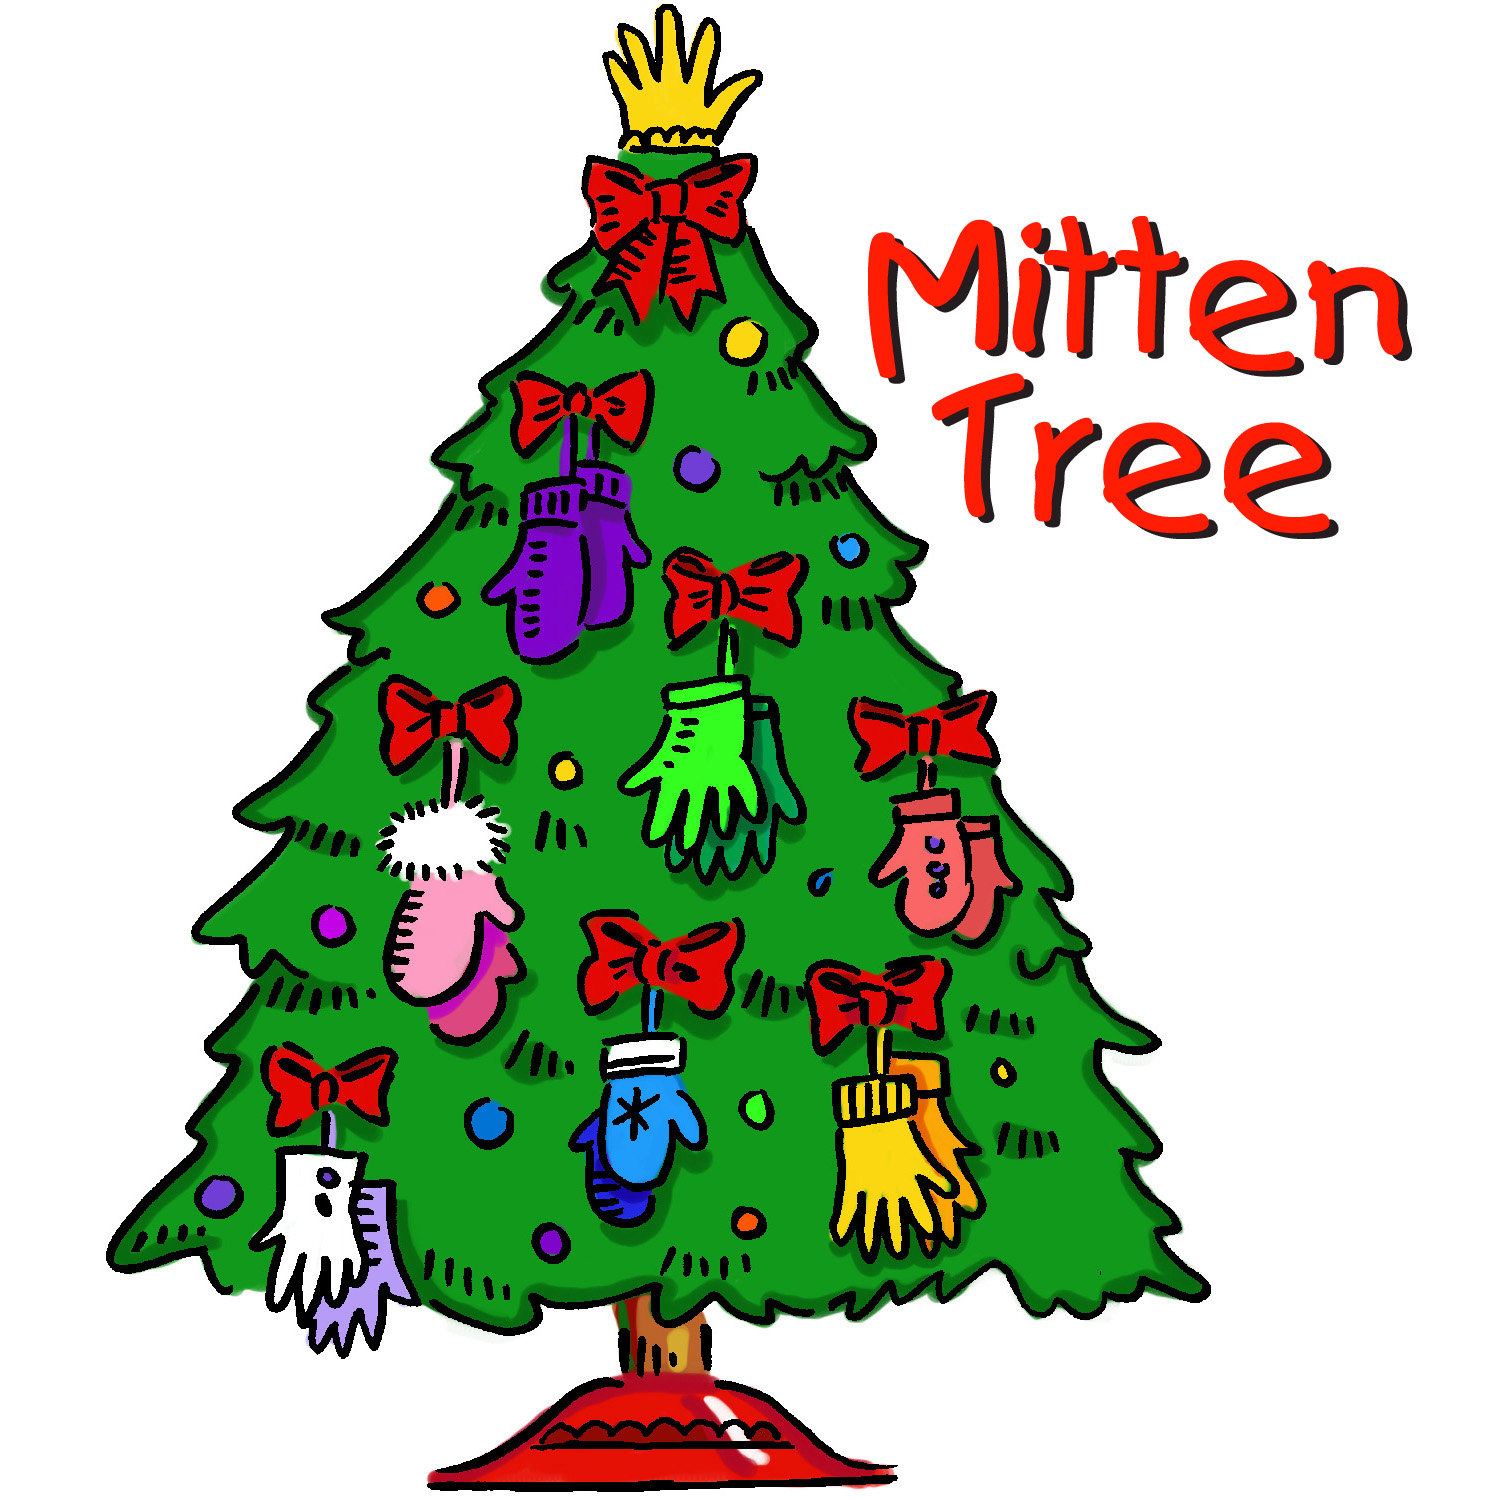 mitten-tree-day-is-on-6th-december-2018-here-is-everything-about-this